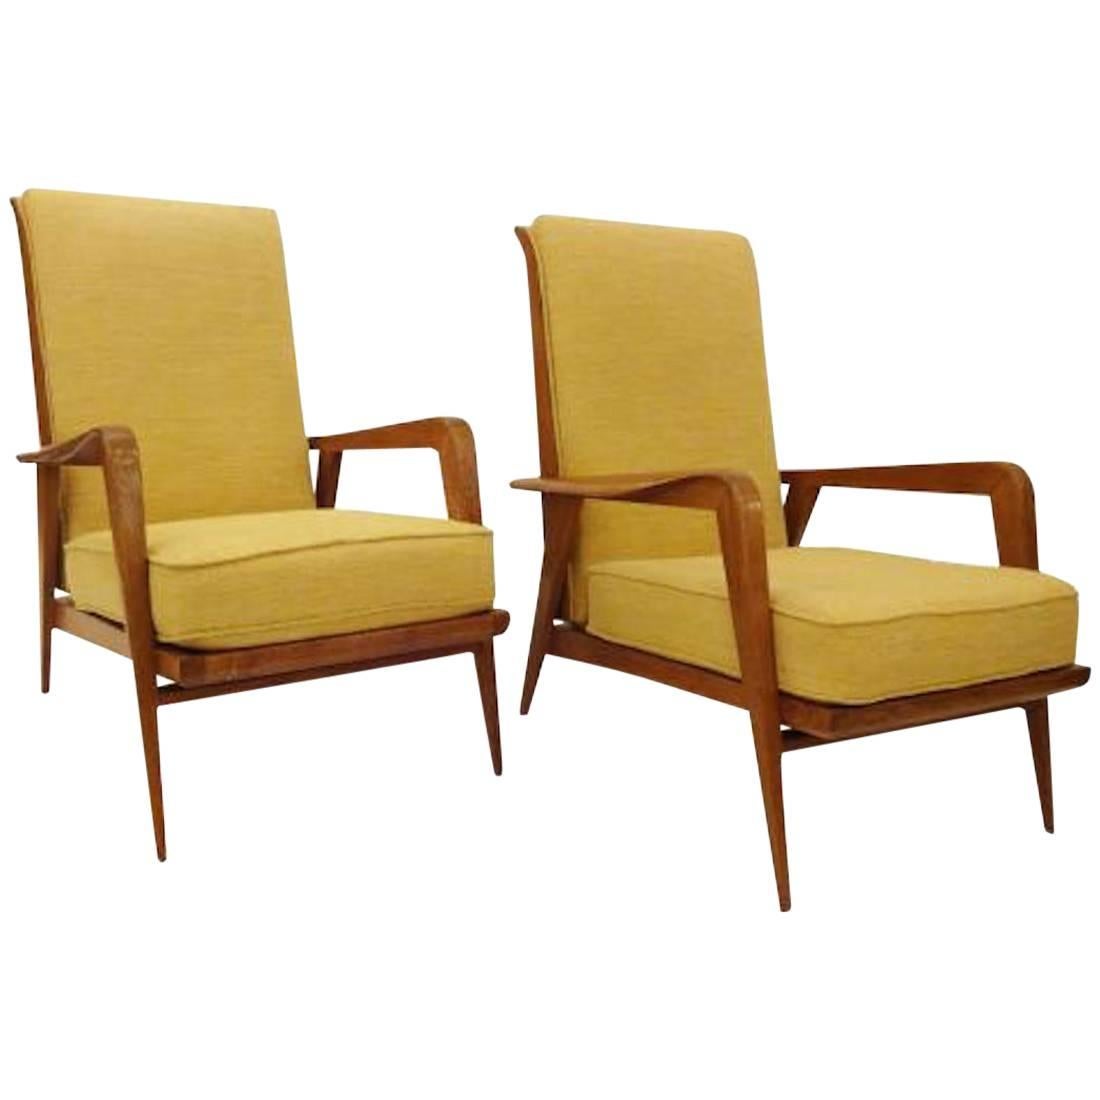 Pair of Modernist Reclining Lounge Chairs by Etienne-Henri Martin, circa 1937 For Sale